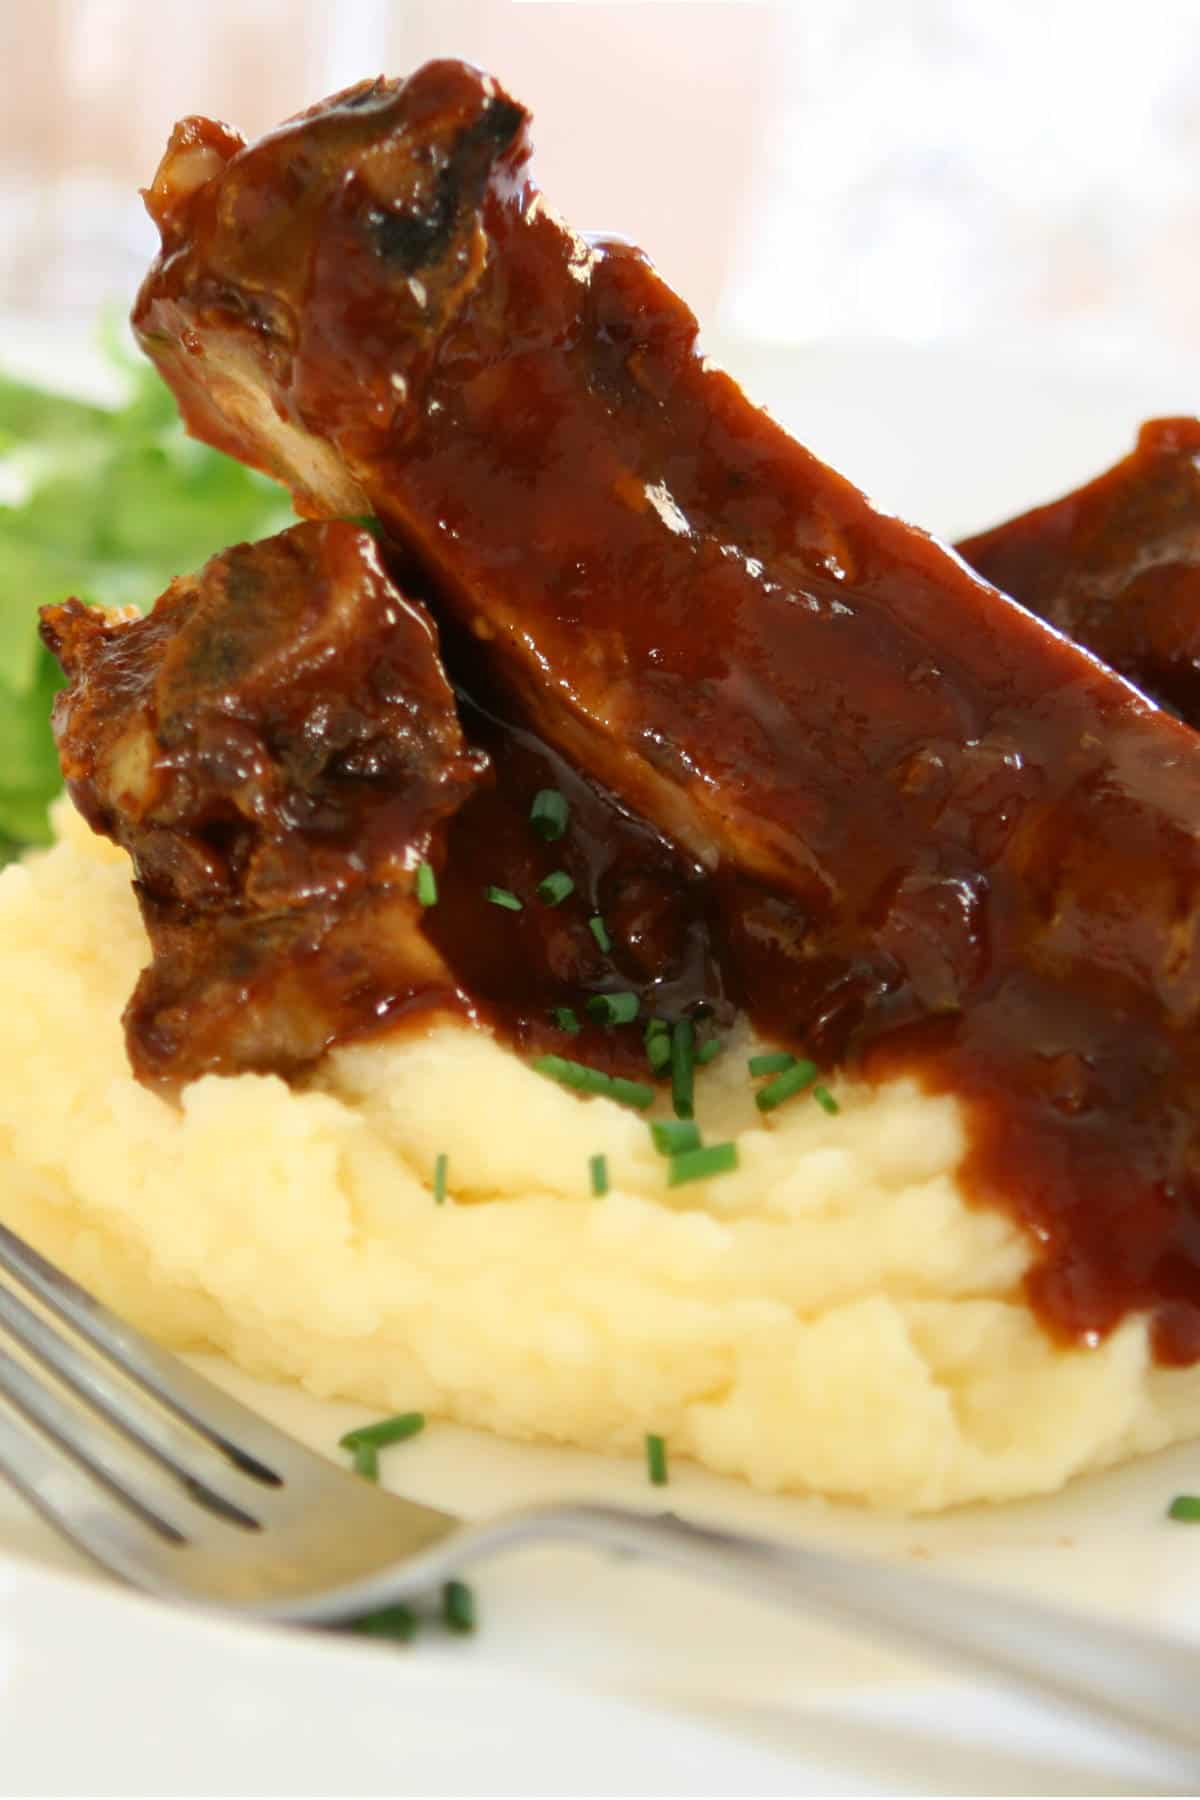 slow cooked beef back ribs on top of mashed potatoes on a plate.